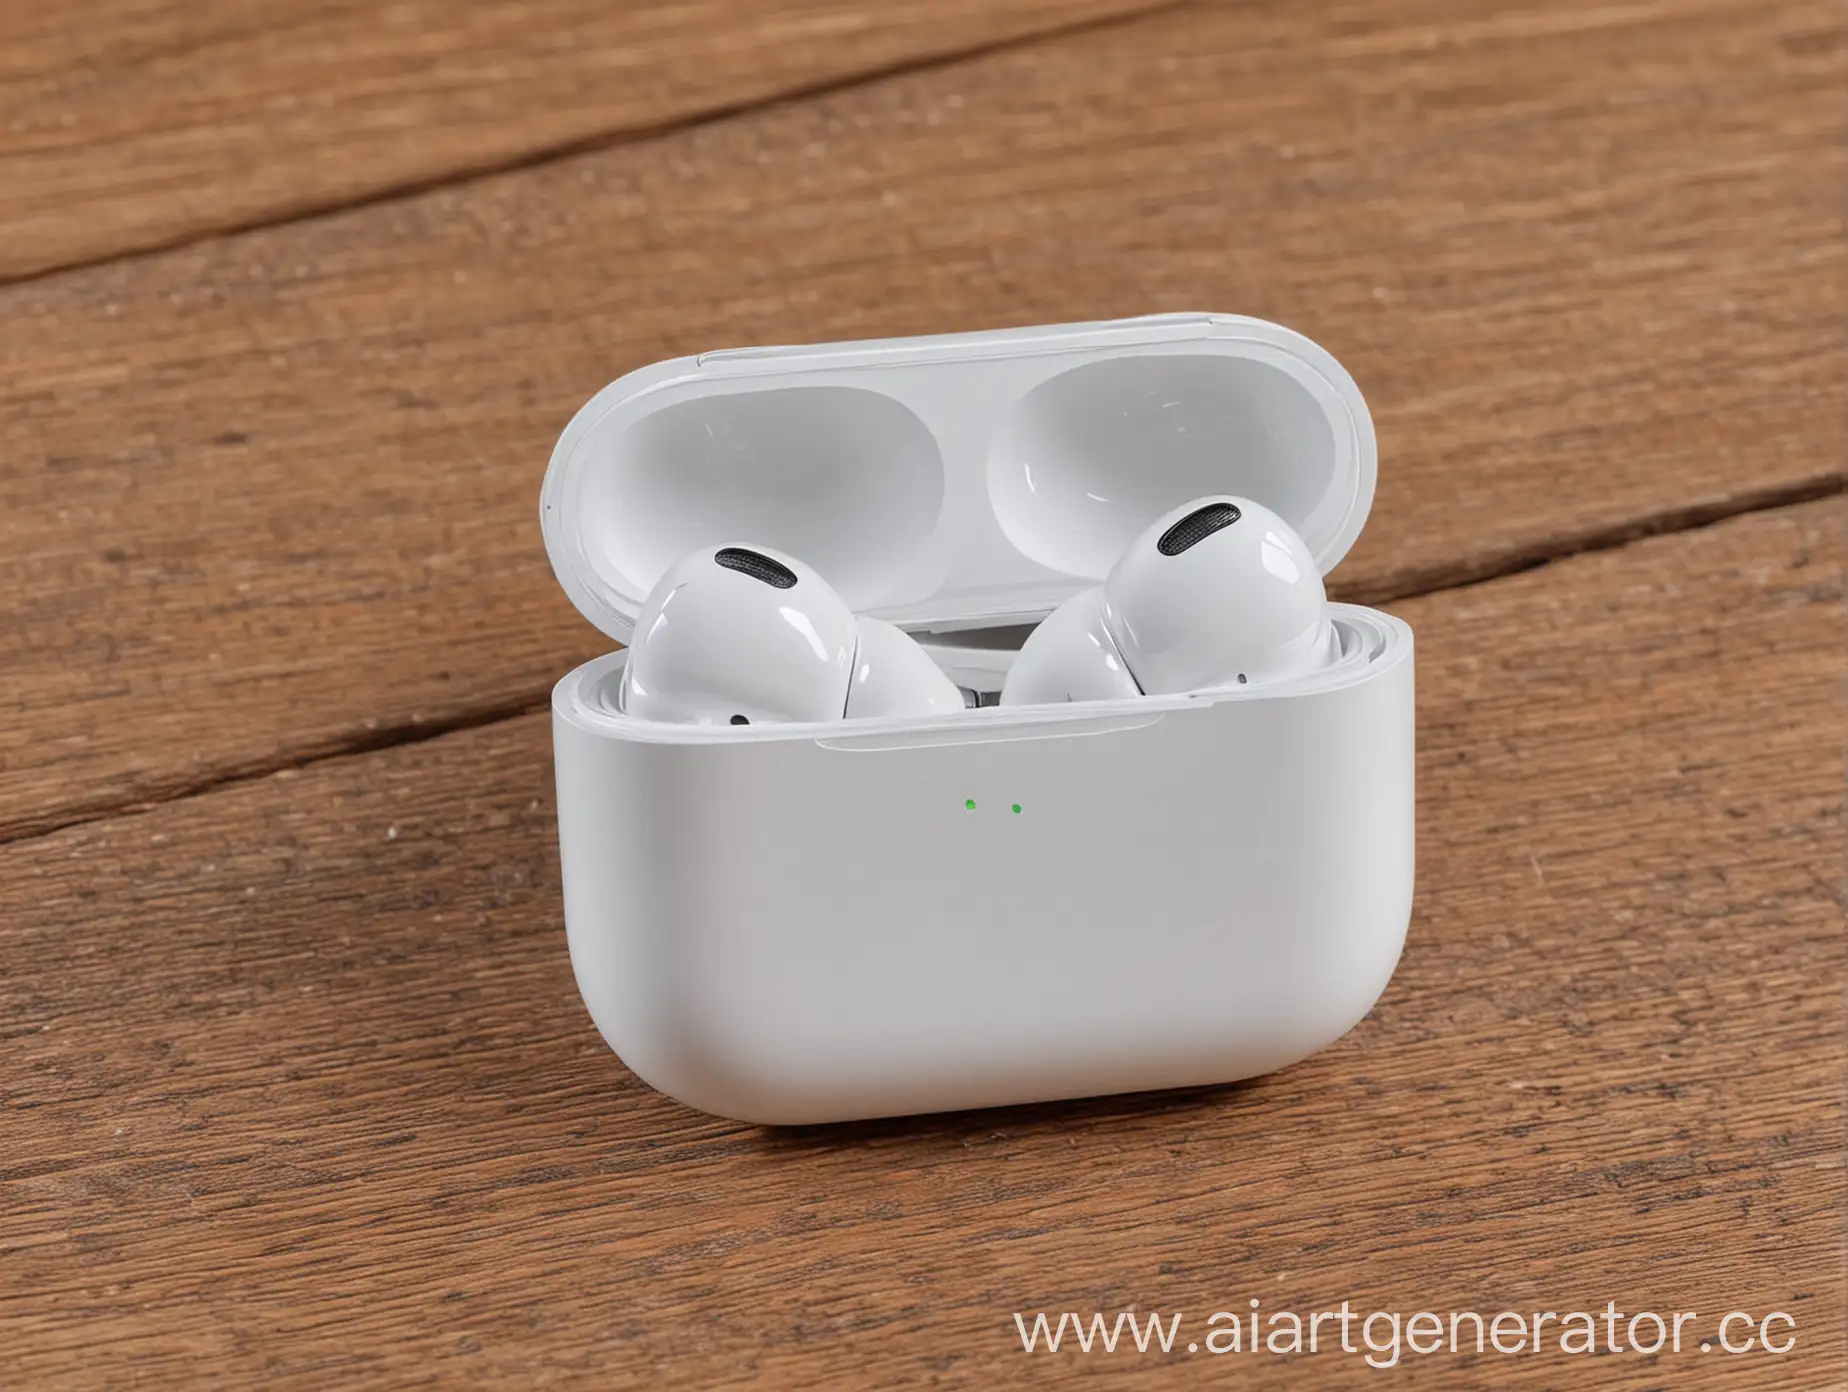 Apple-AirPods-Pro-2-Displayed-on-Rustic-Wooden-Table